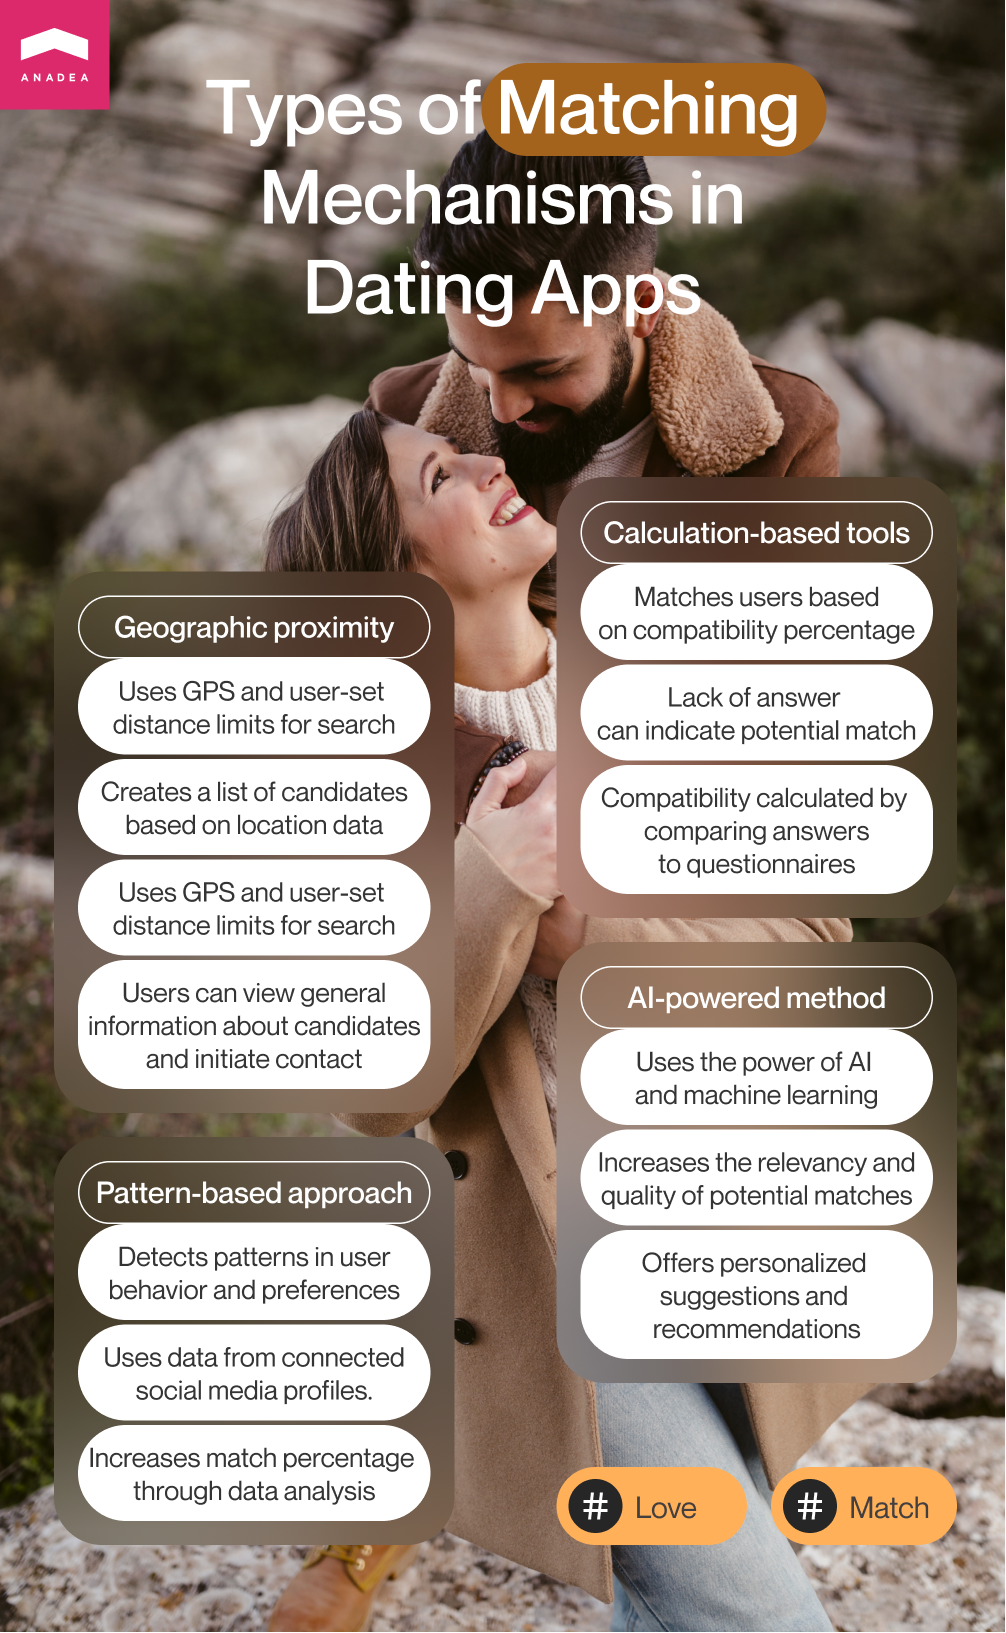 Different matching algorithms for dating apps - Infographic